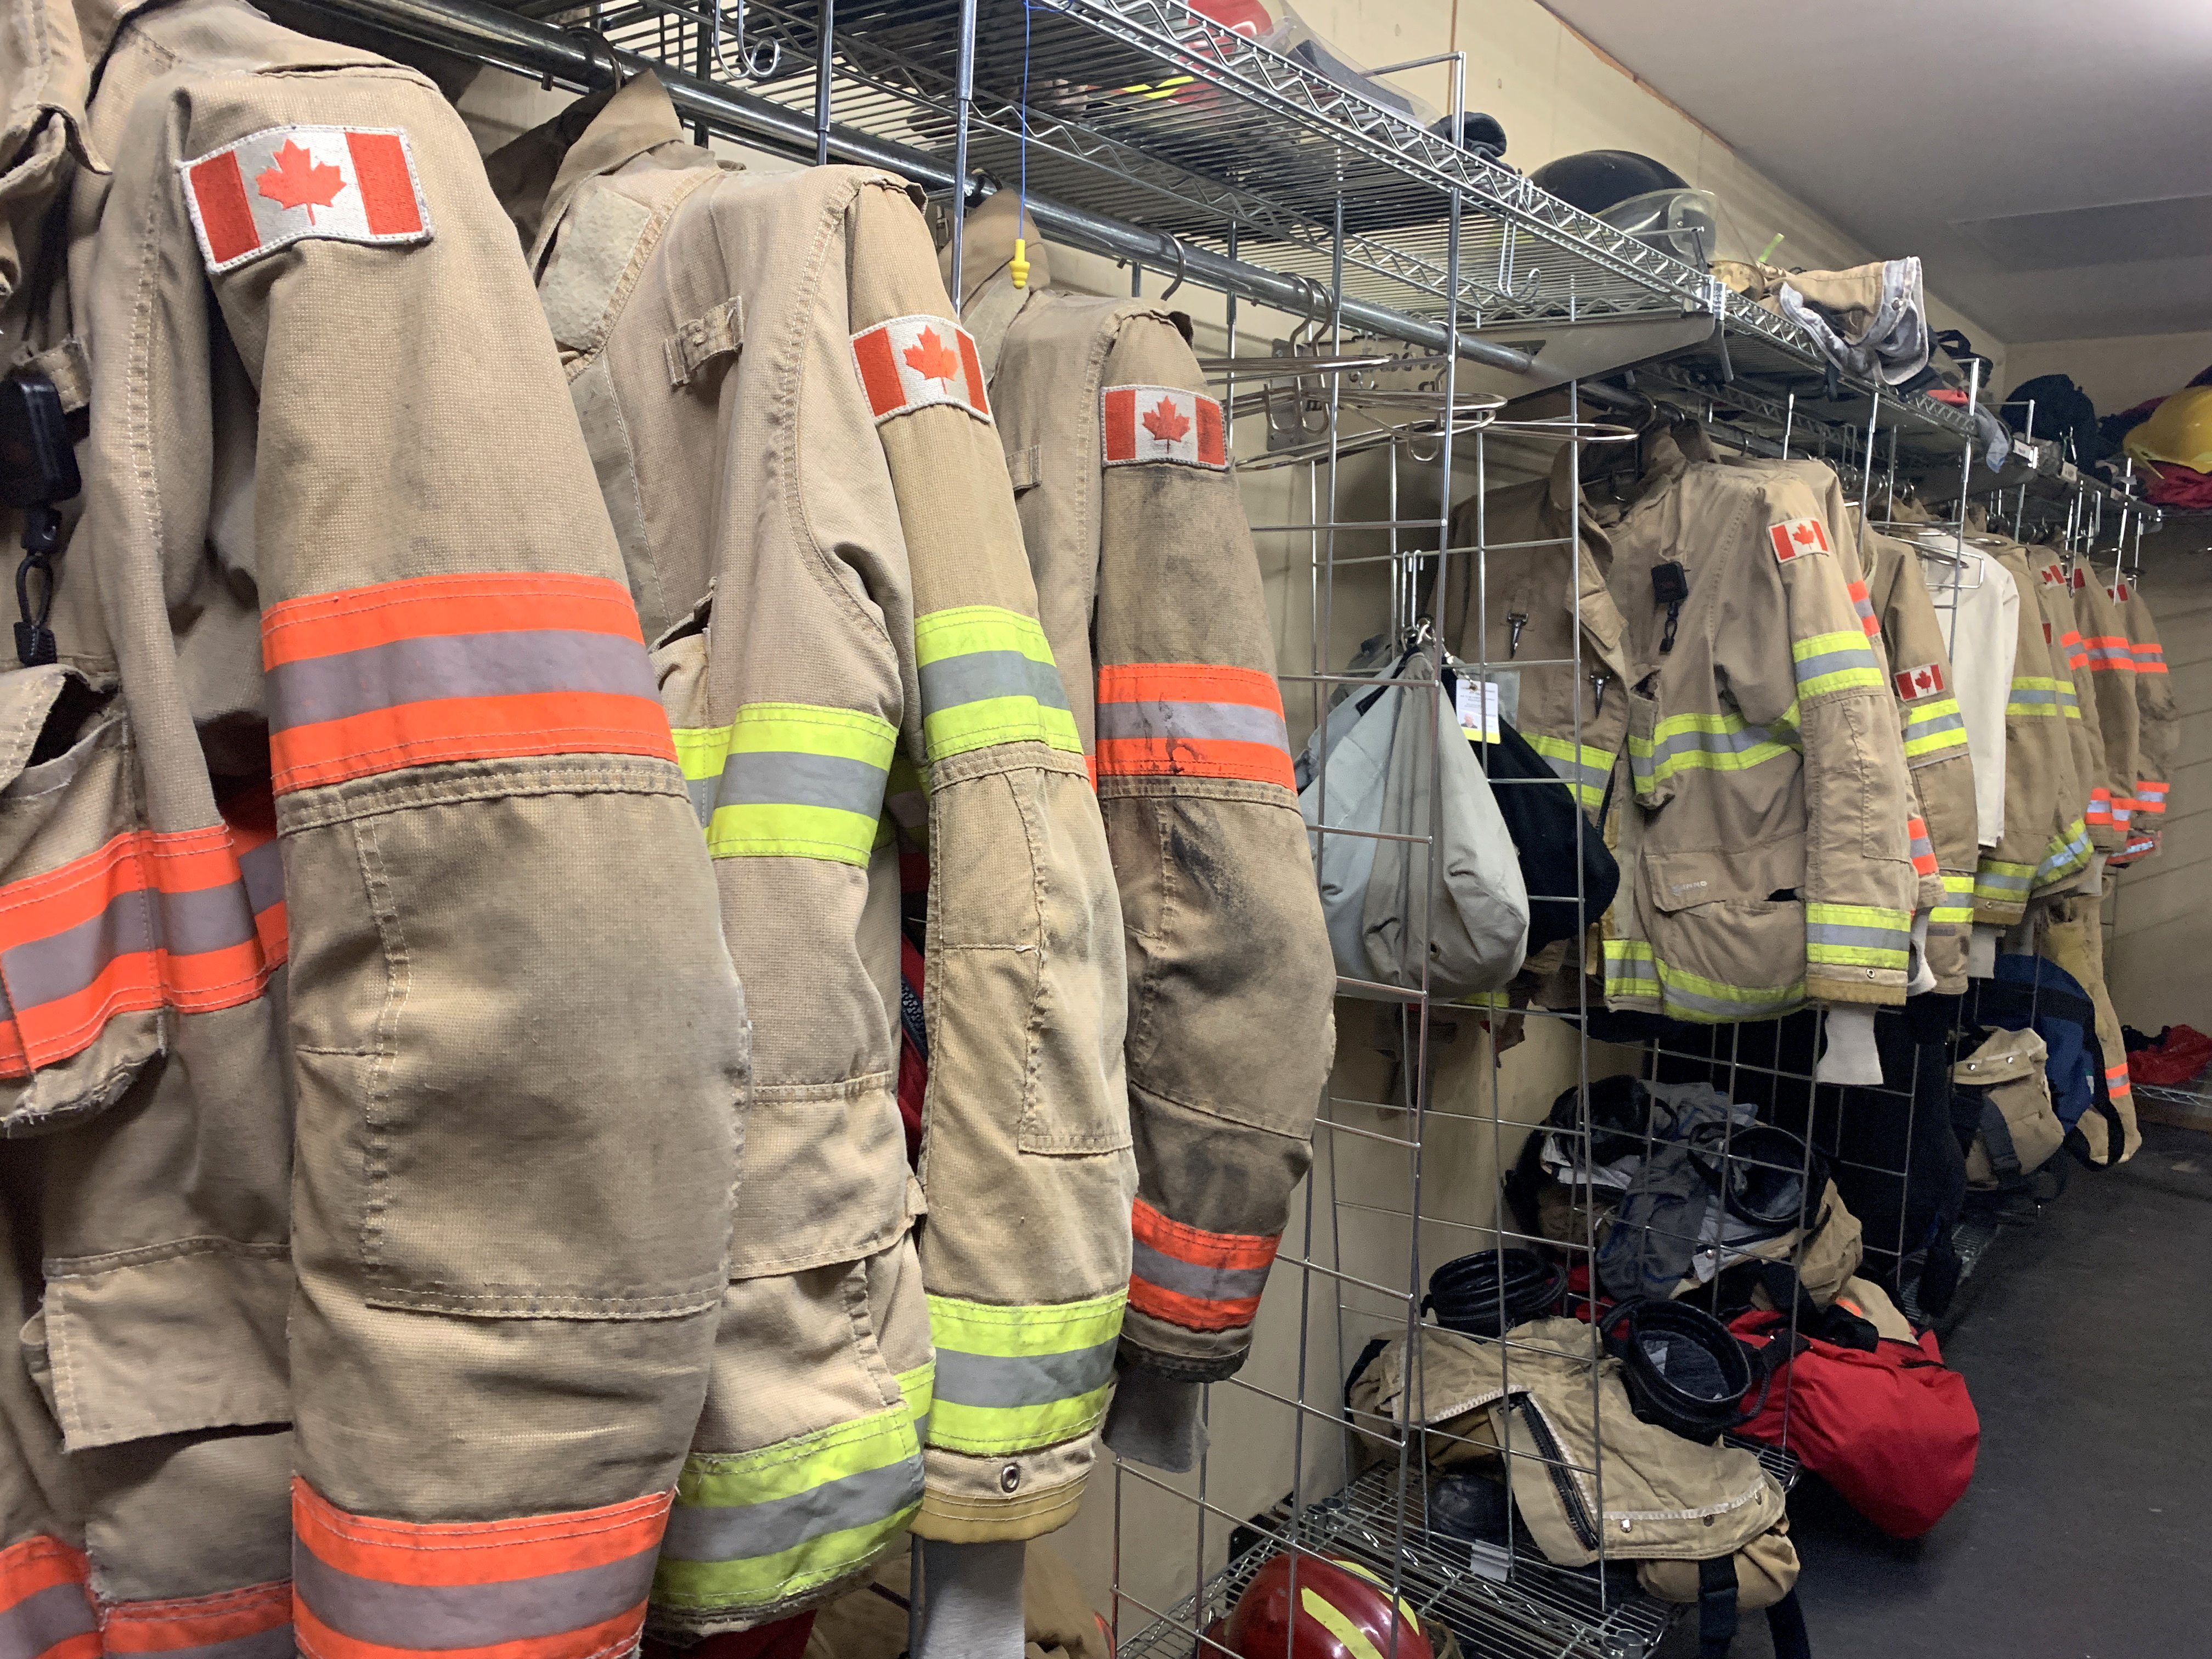 Firefighter Jackets hanging up on a coat rack